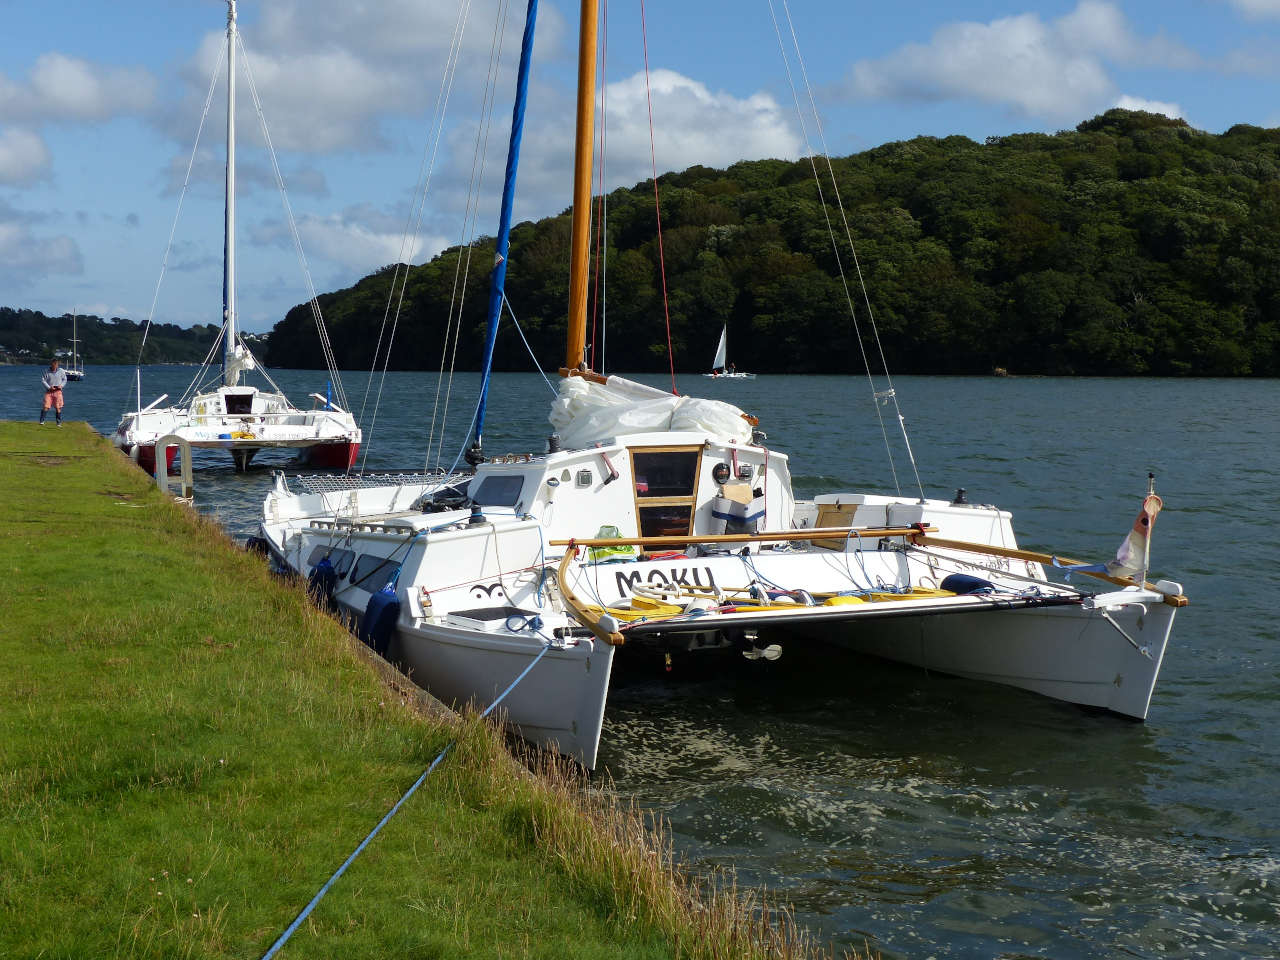 Two catamarans on a quayside, treees in background